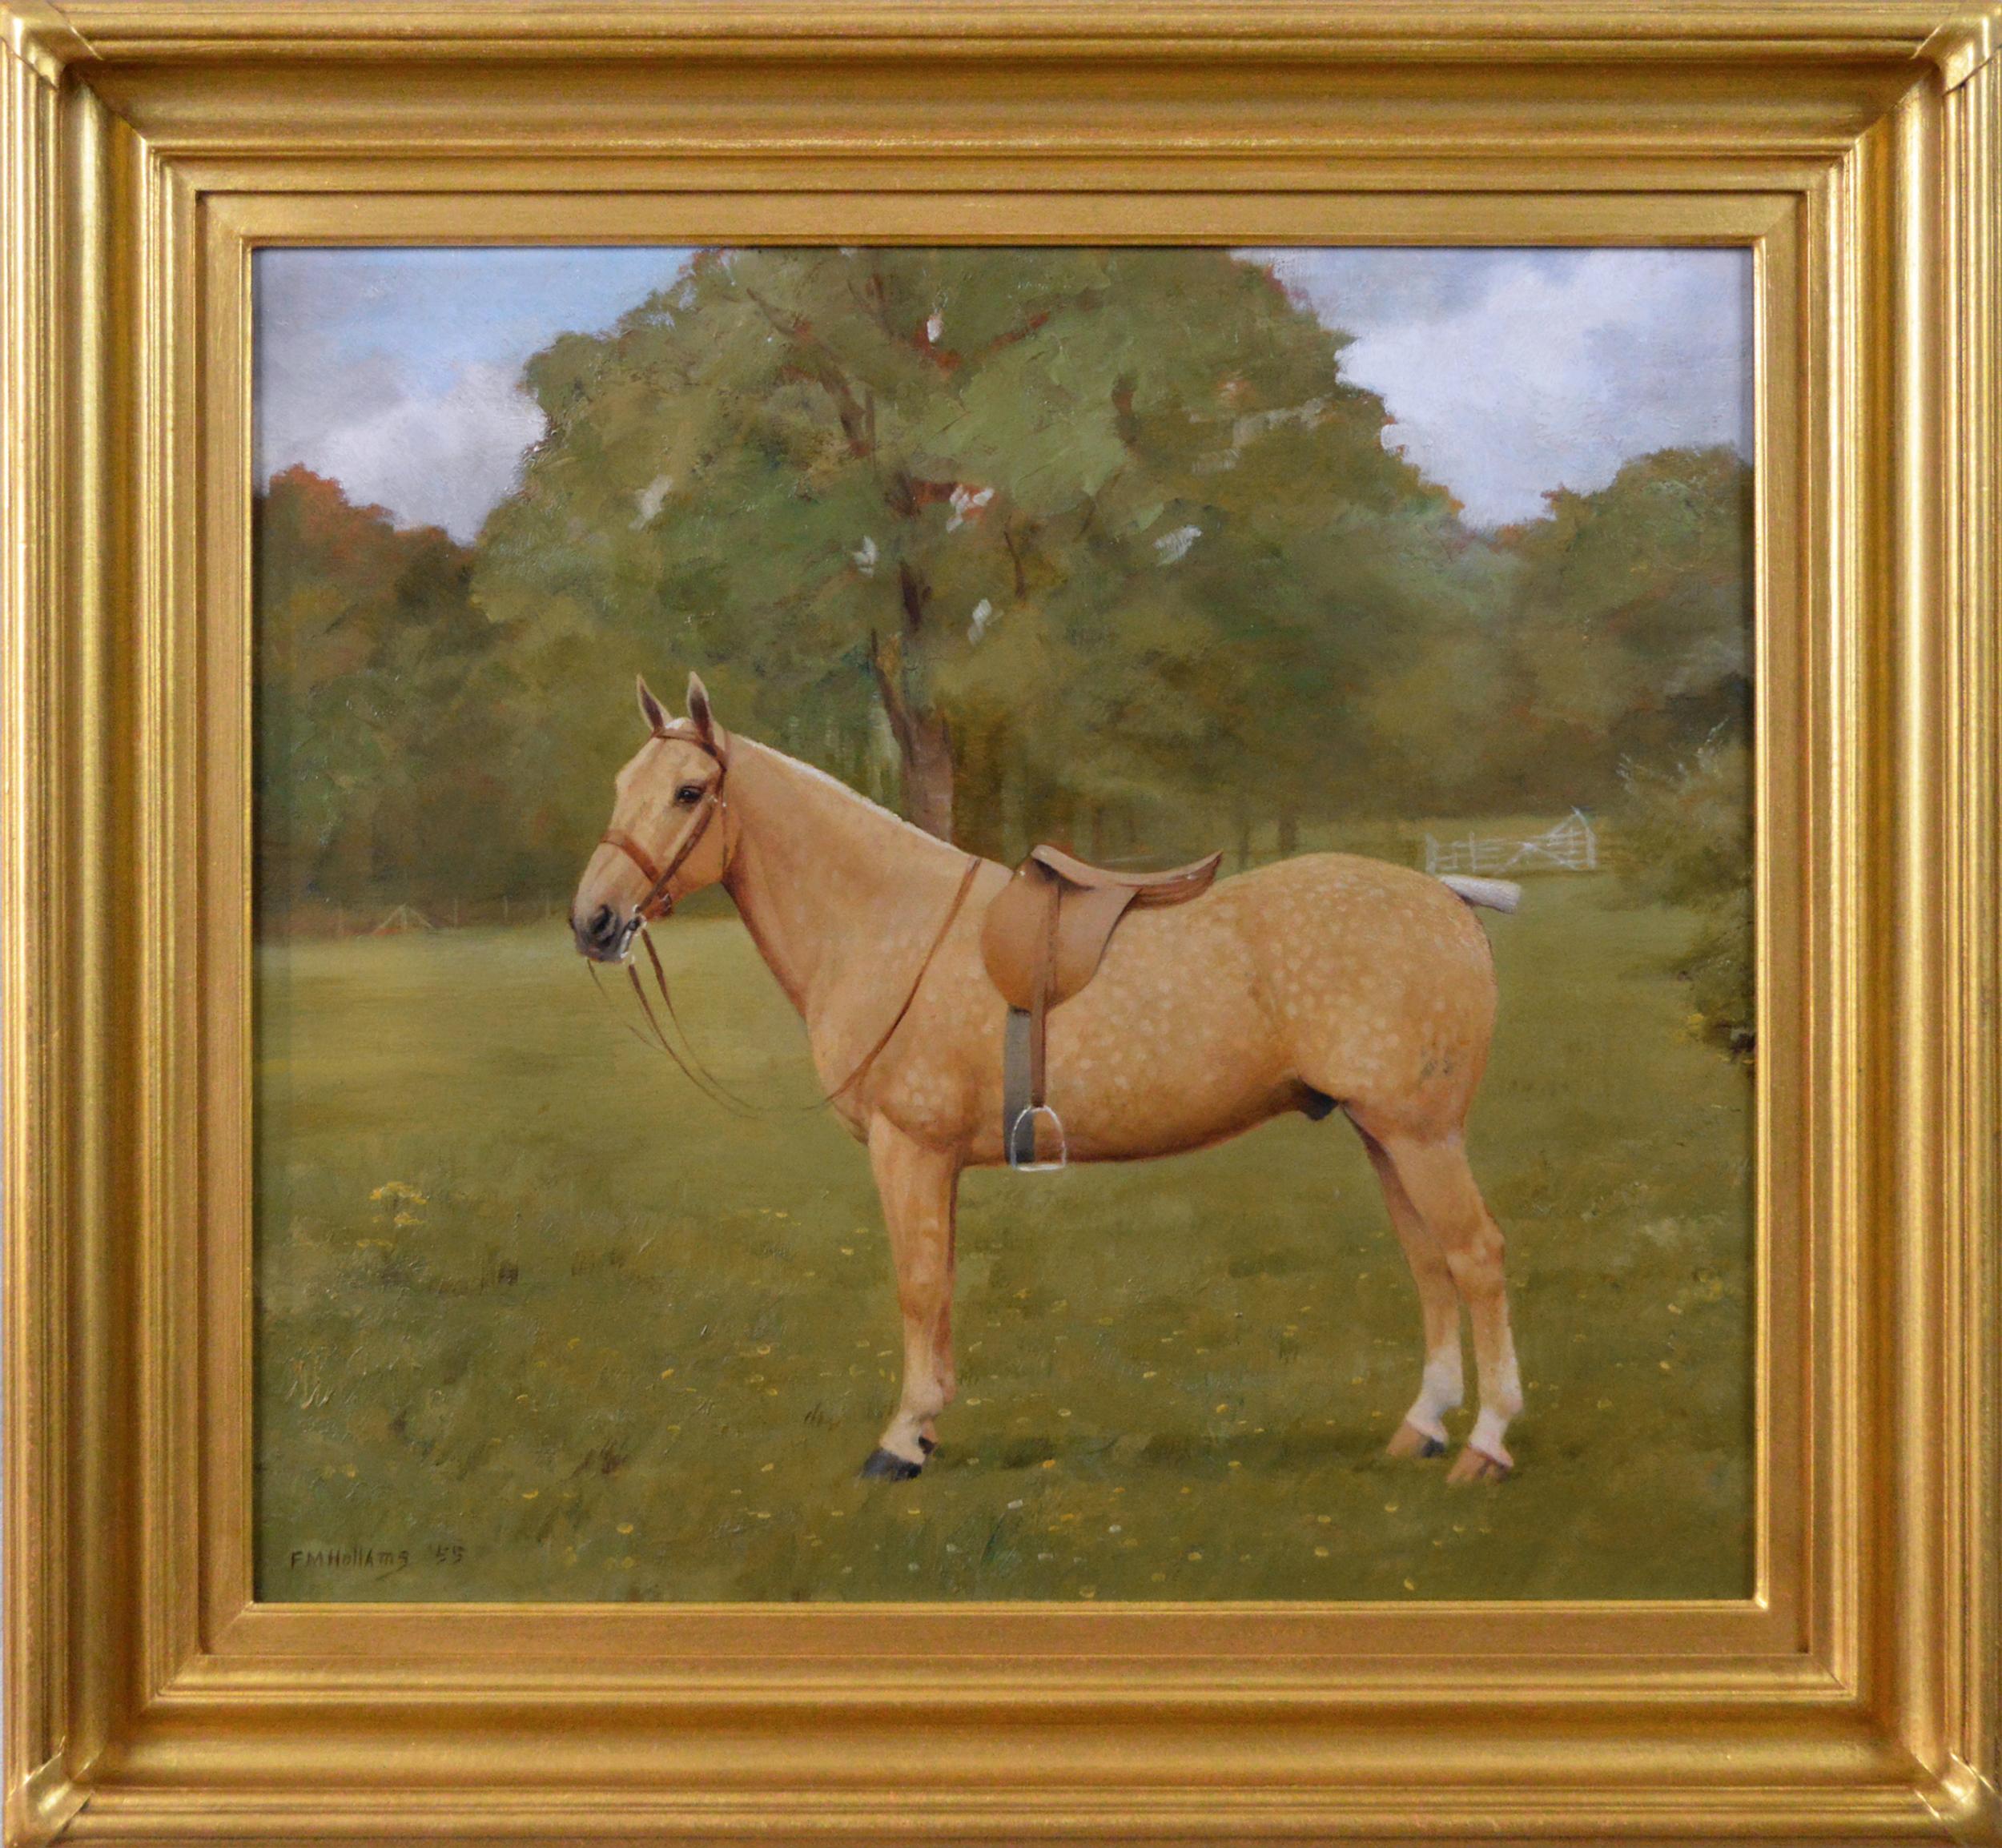 Florence Mabel Hollams Animal Painting - Horse portrait oil painting of a Palomino hunter